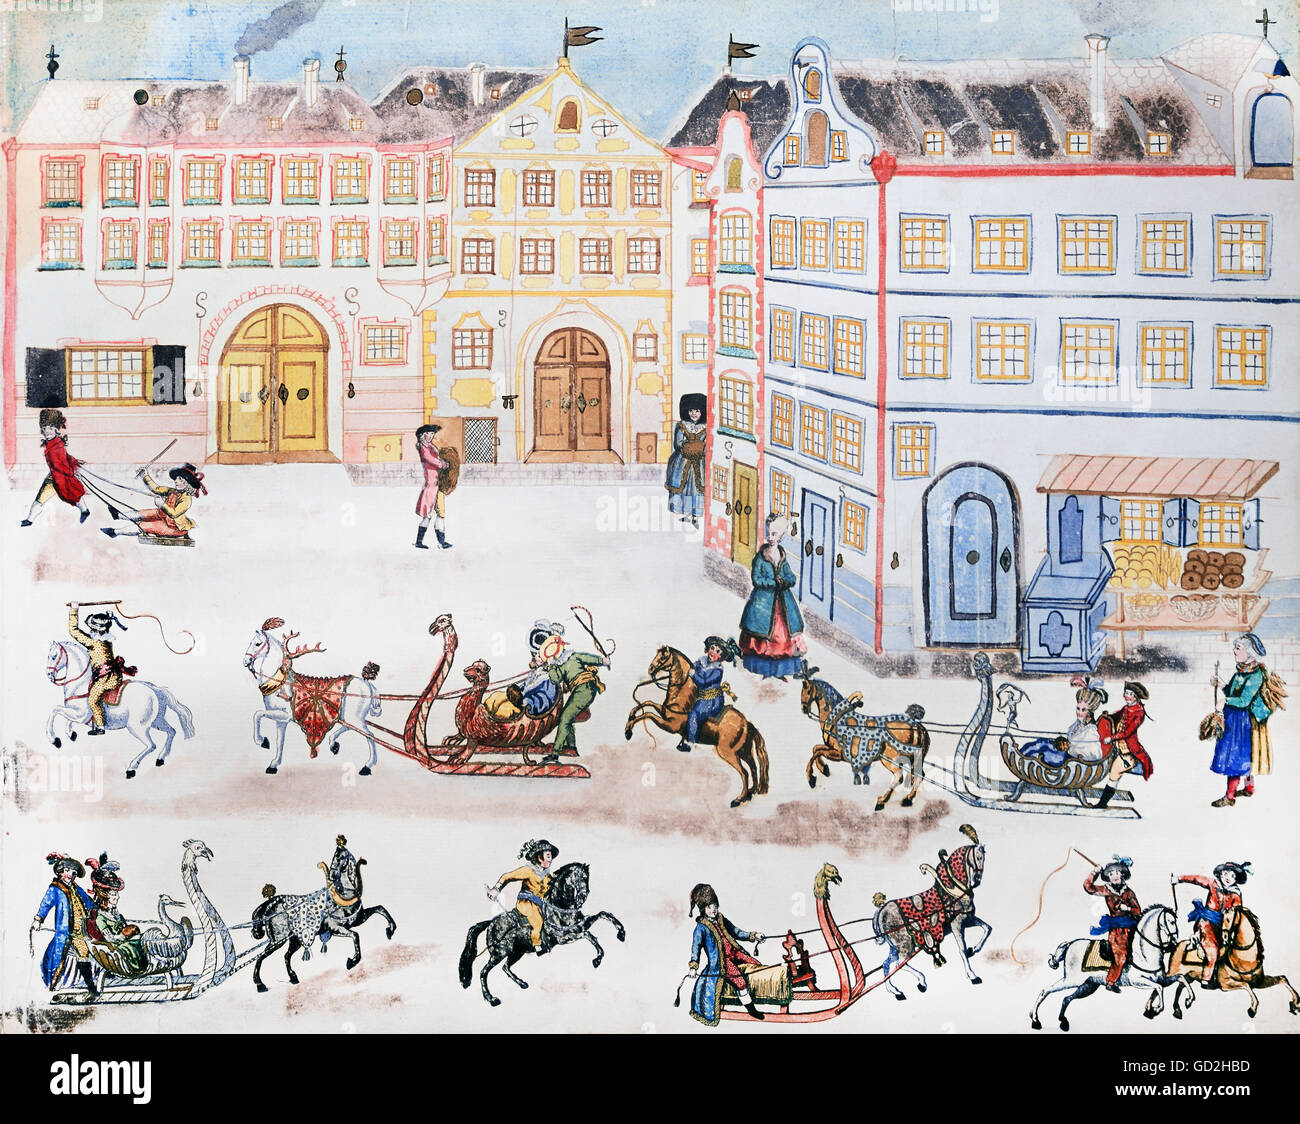 seasons, winter, 'Schlitten-Korso' (Sleigh Parade), collage of coloured engravings, watercolour, 30 x 38 cm, Nuremberg, late 18th century, Bavarian National Museum, Munich, Additional-Rights-Clearences-Not Available Stock Photo